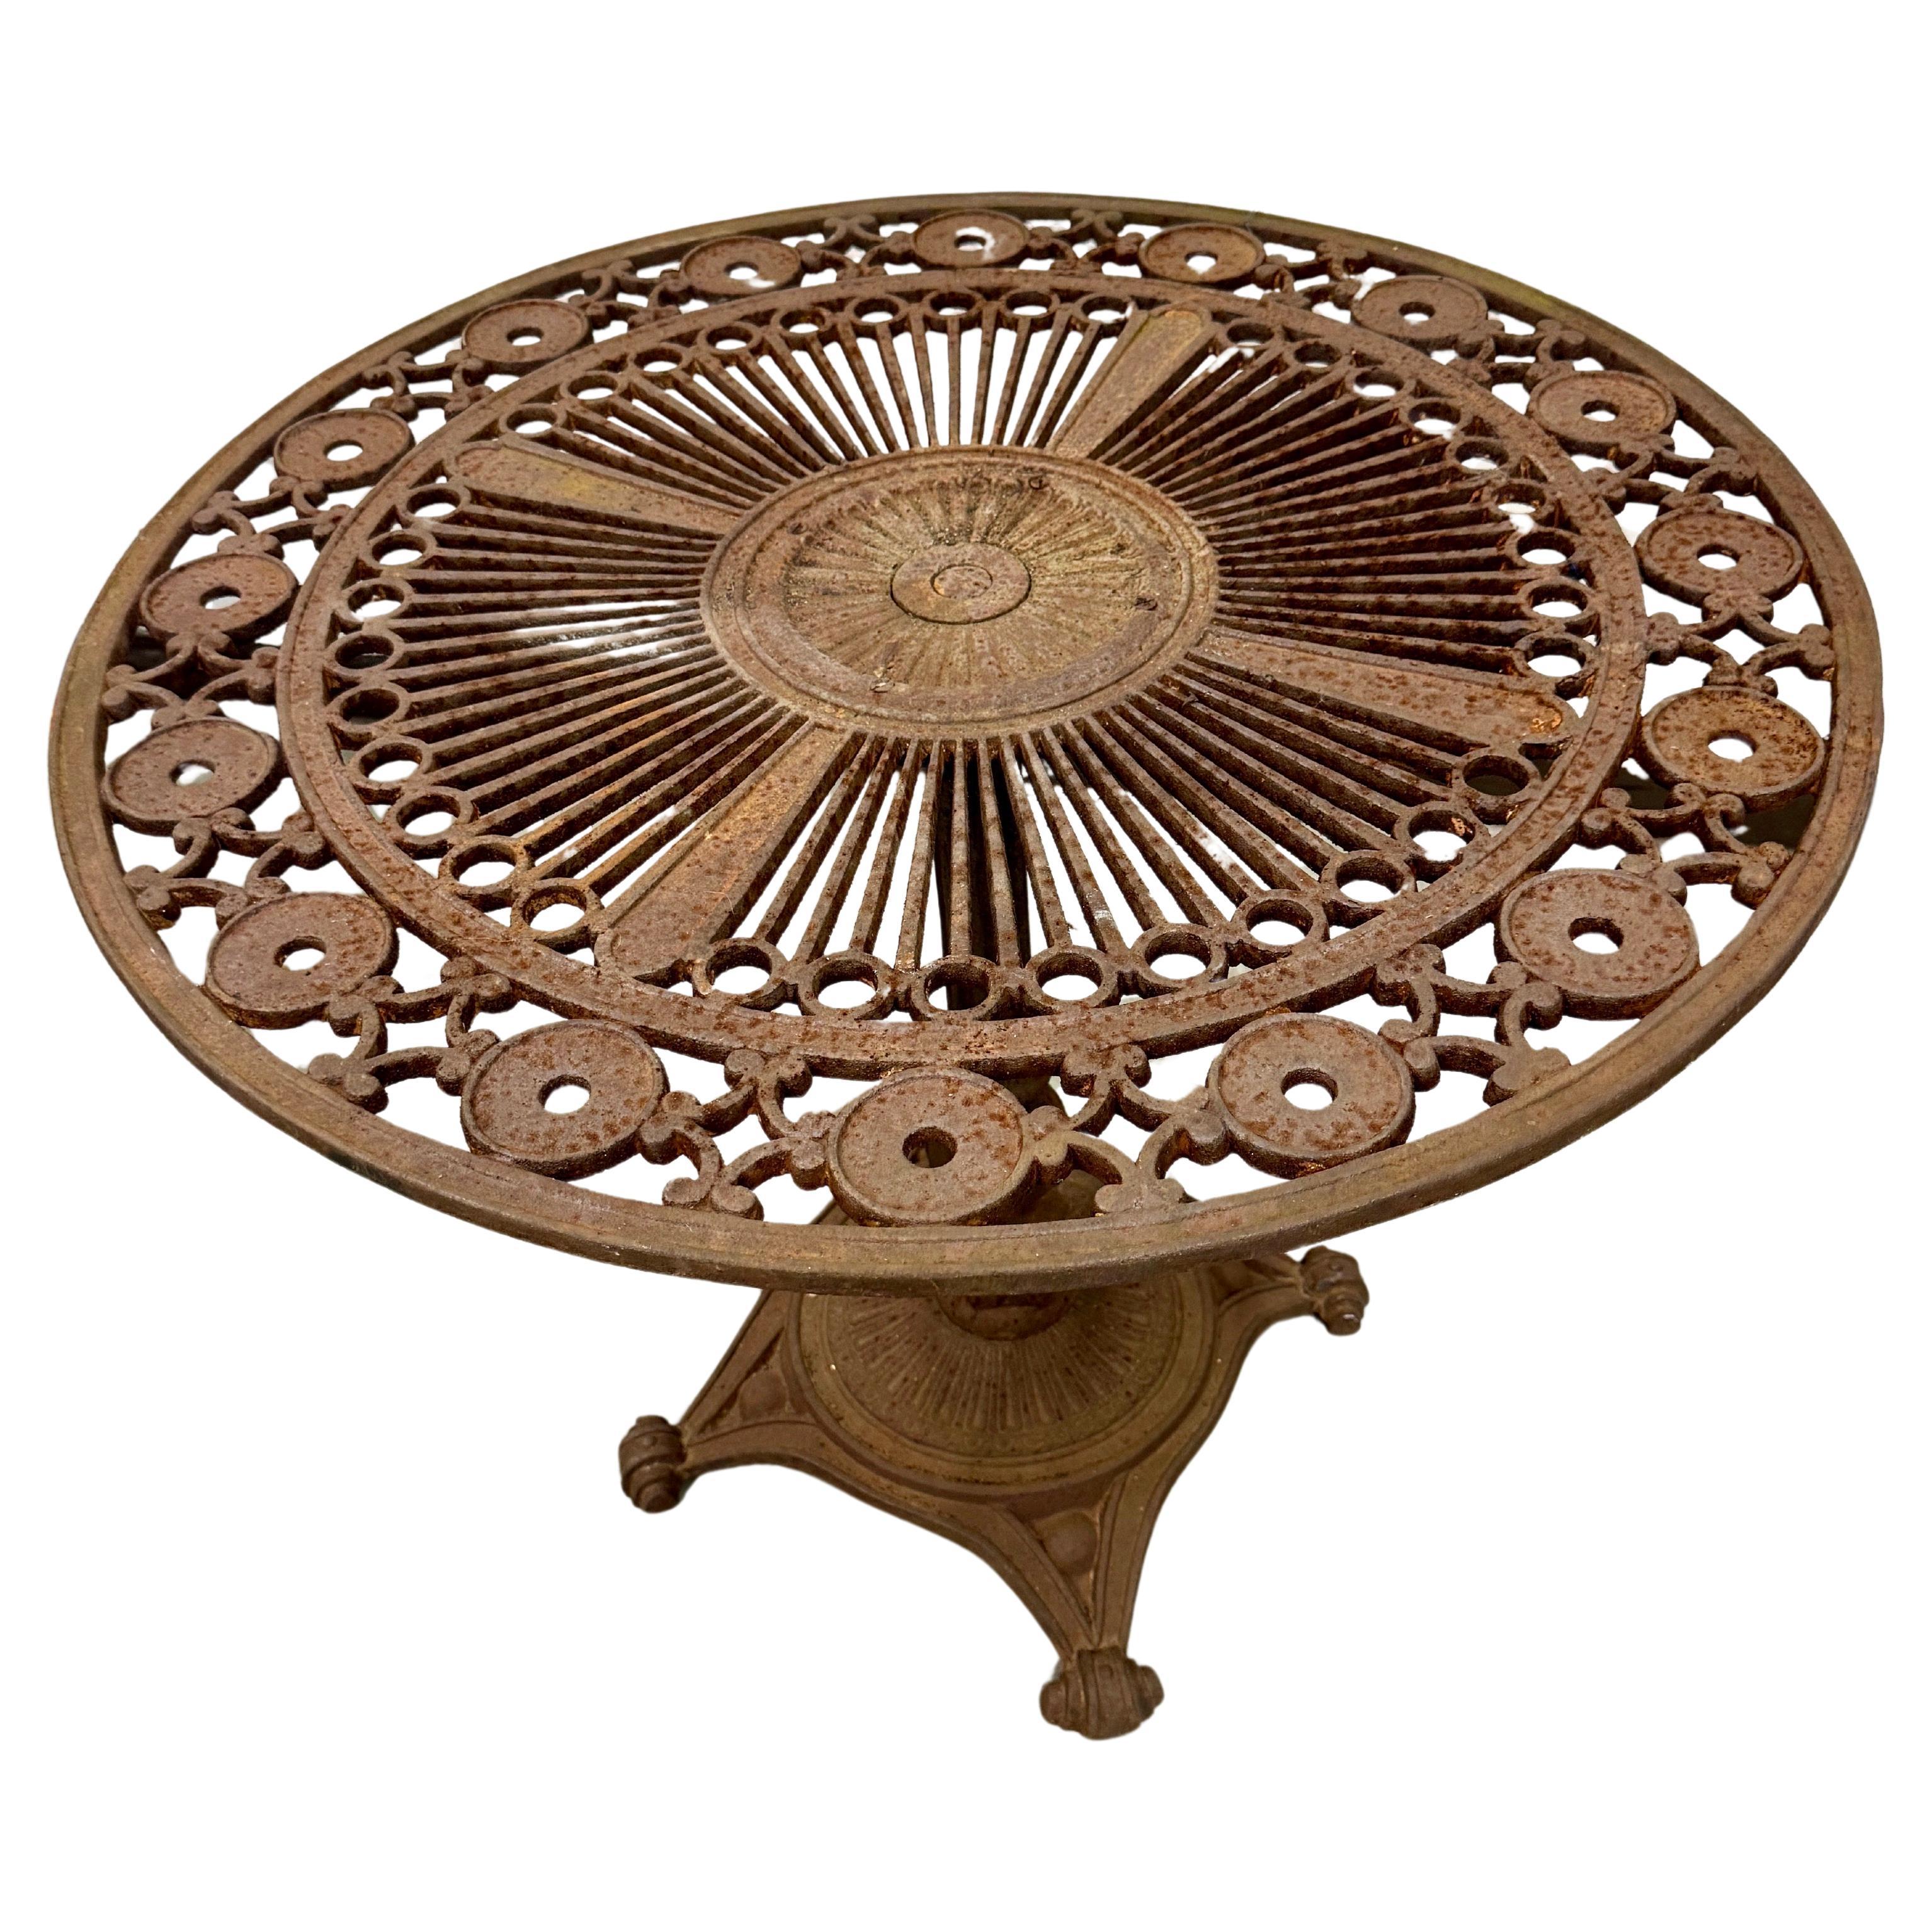 Cast Iron Garden Patio Table, 1920's France

This charming and sturdy cast iron table can be used either indoors or outside. 
The table is made of cast iron with attention to details, the top of the table is adorned with a sun-like circular elements